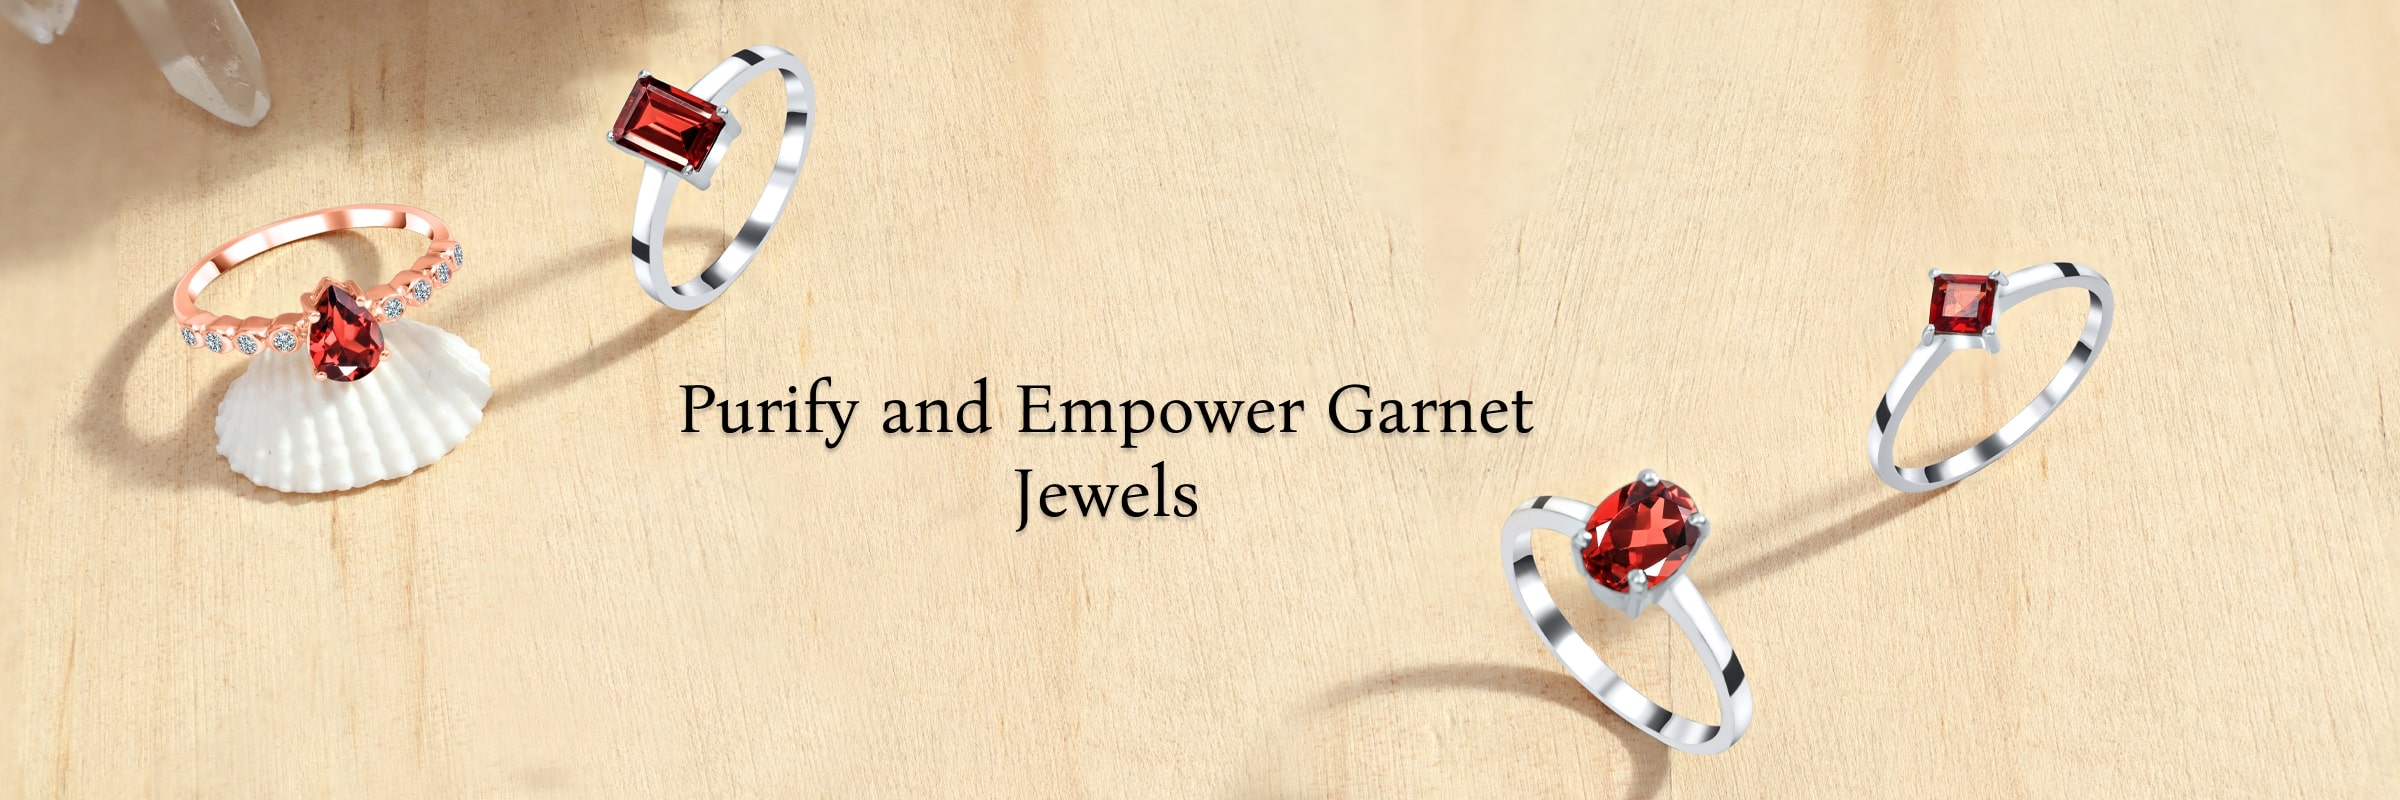 Cleansing and Charging Your Garnet Jewelry